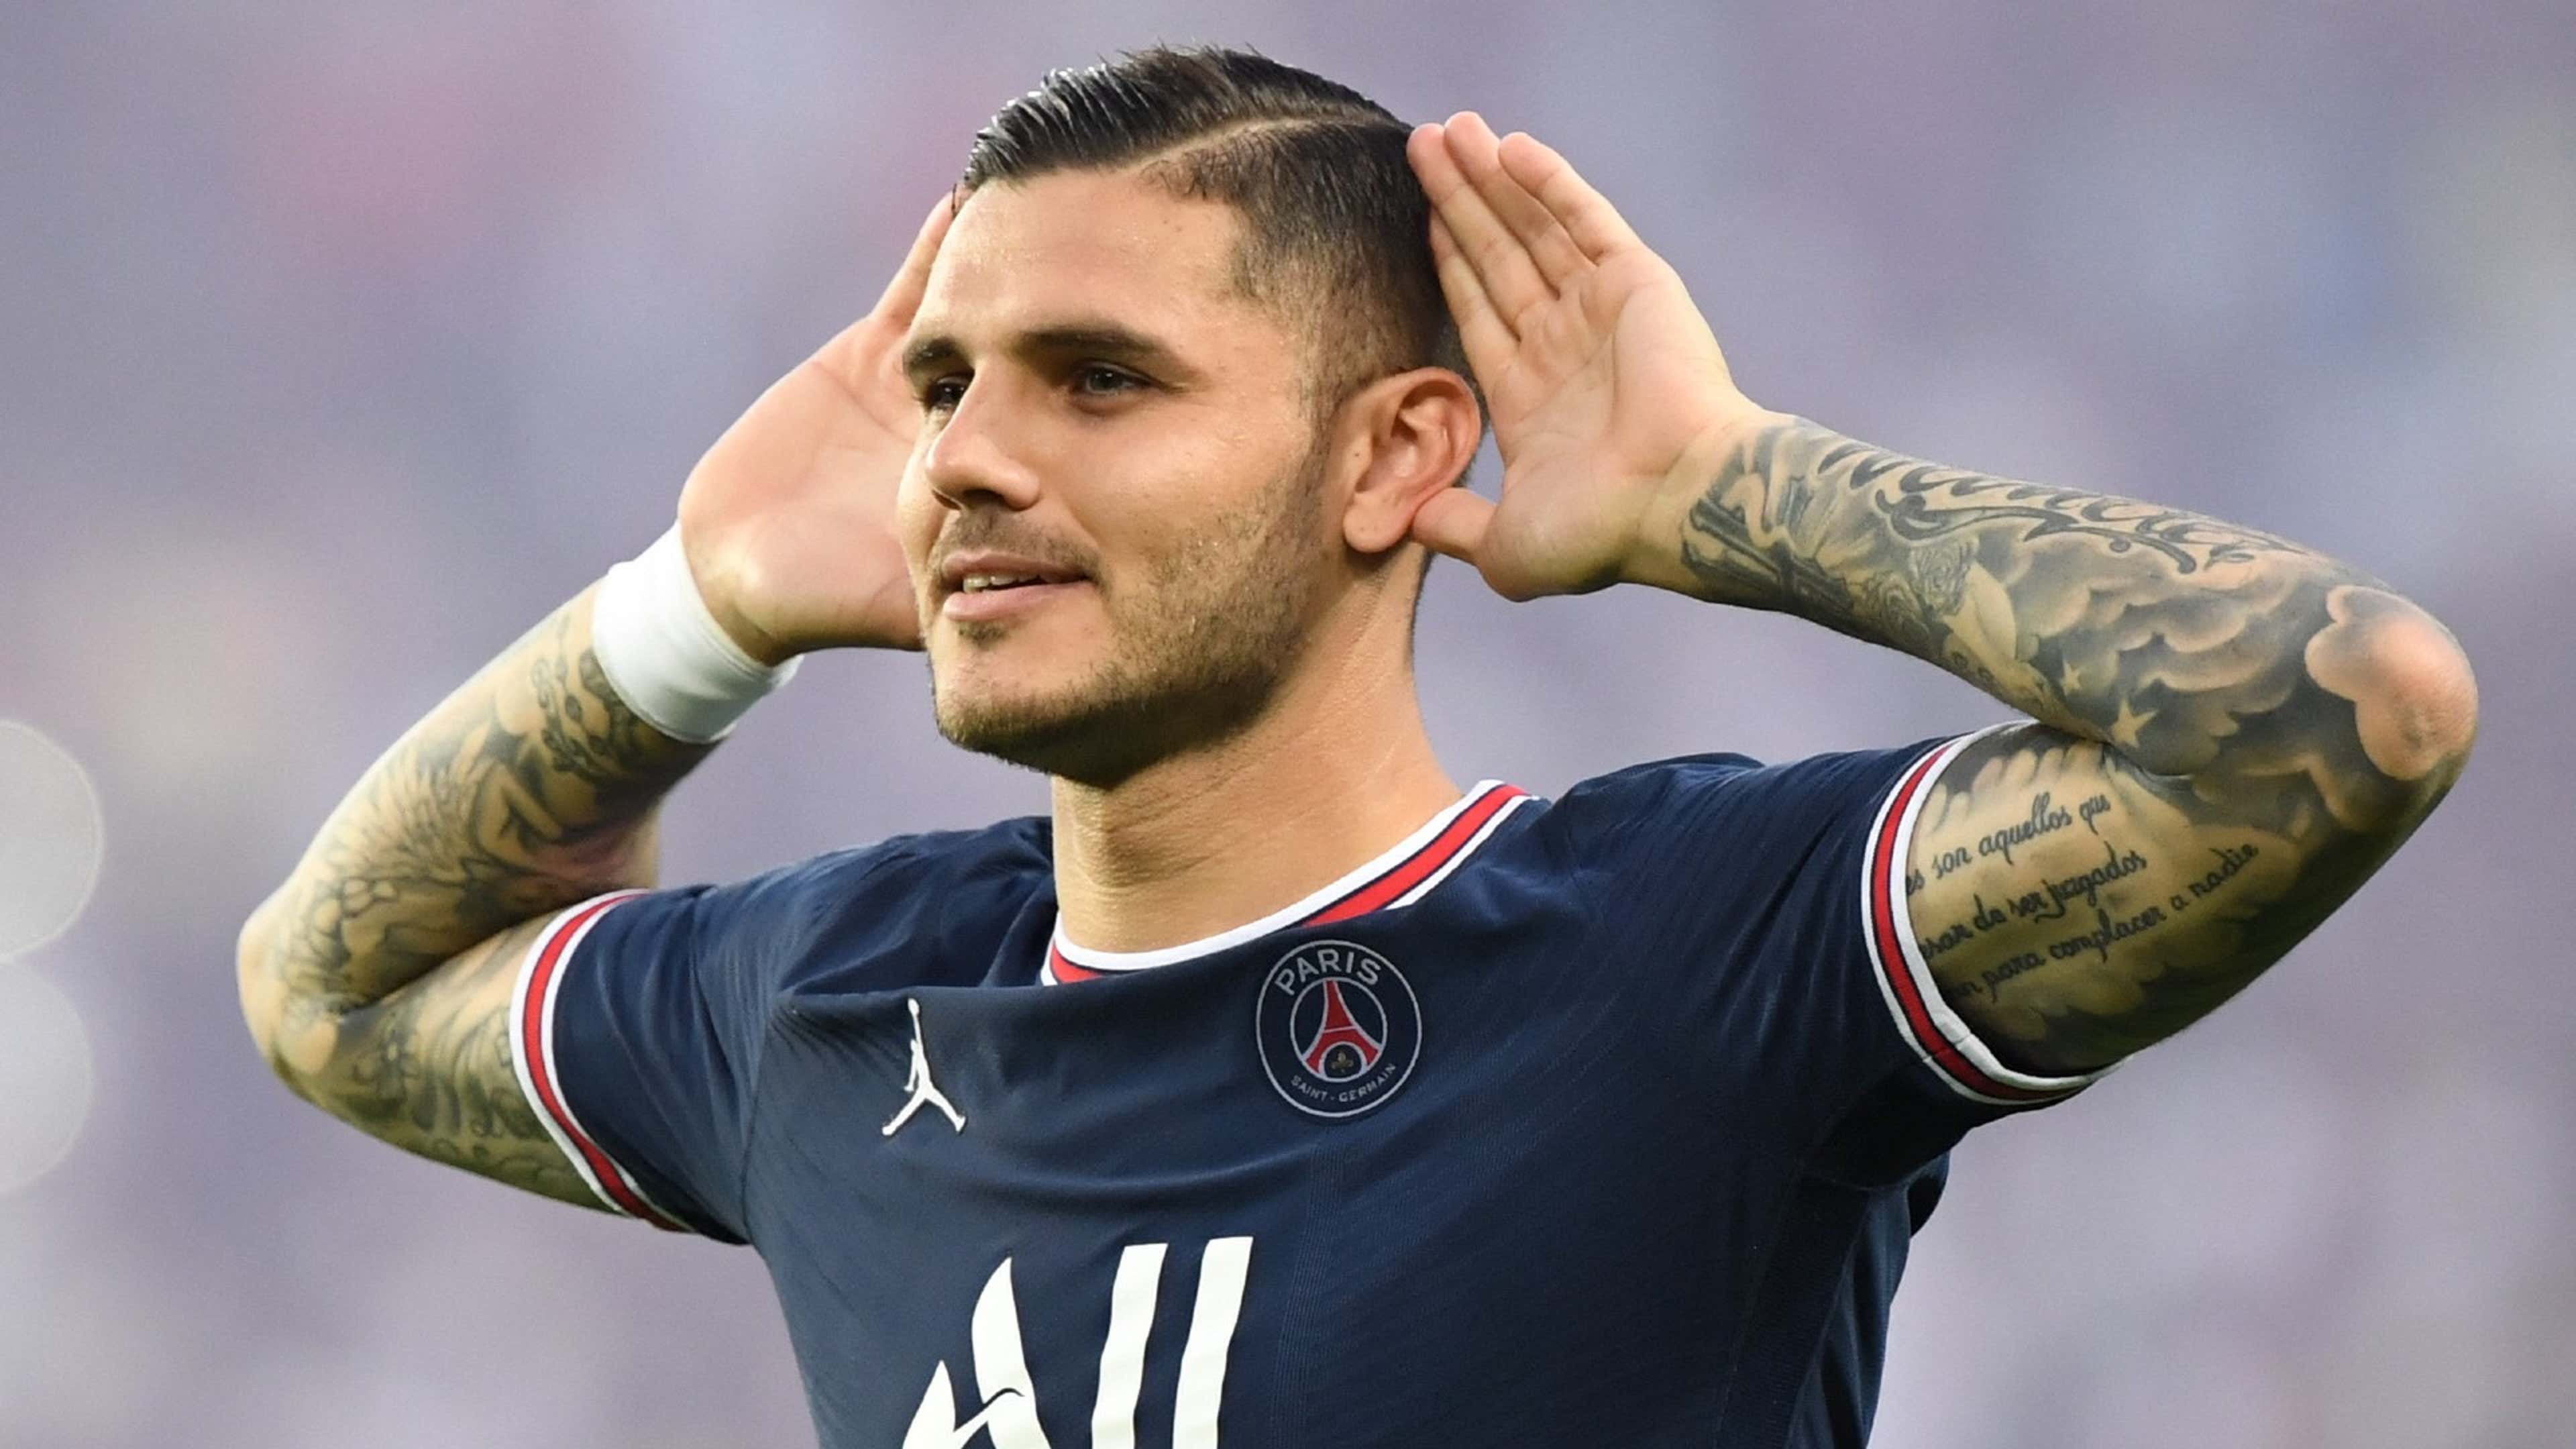 These stories are a load of cr*p!' - PSG's Icardi issues furious